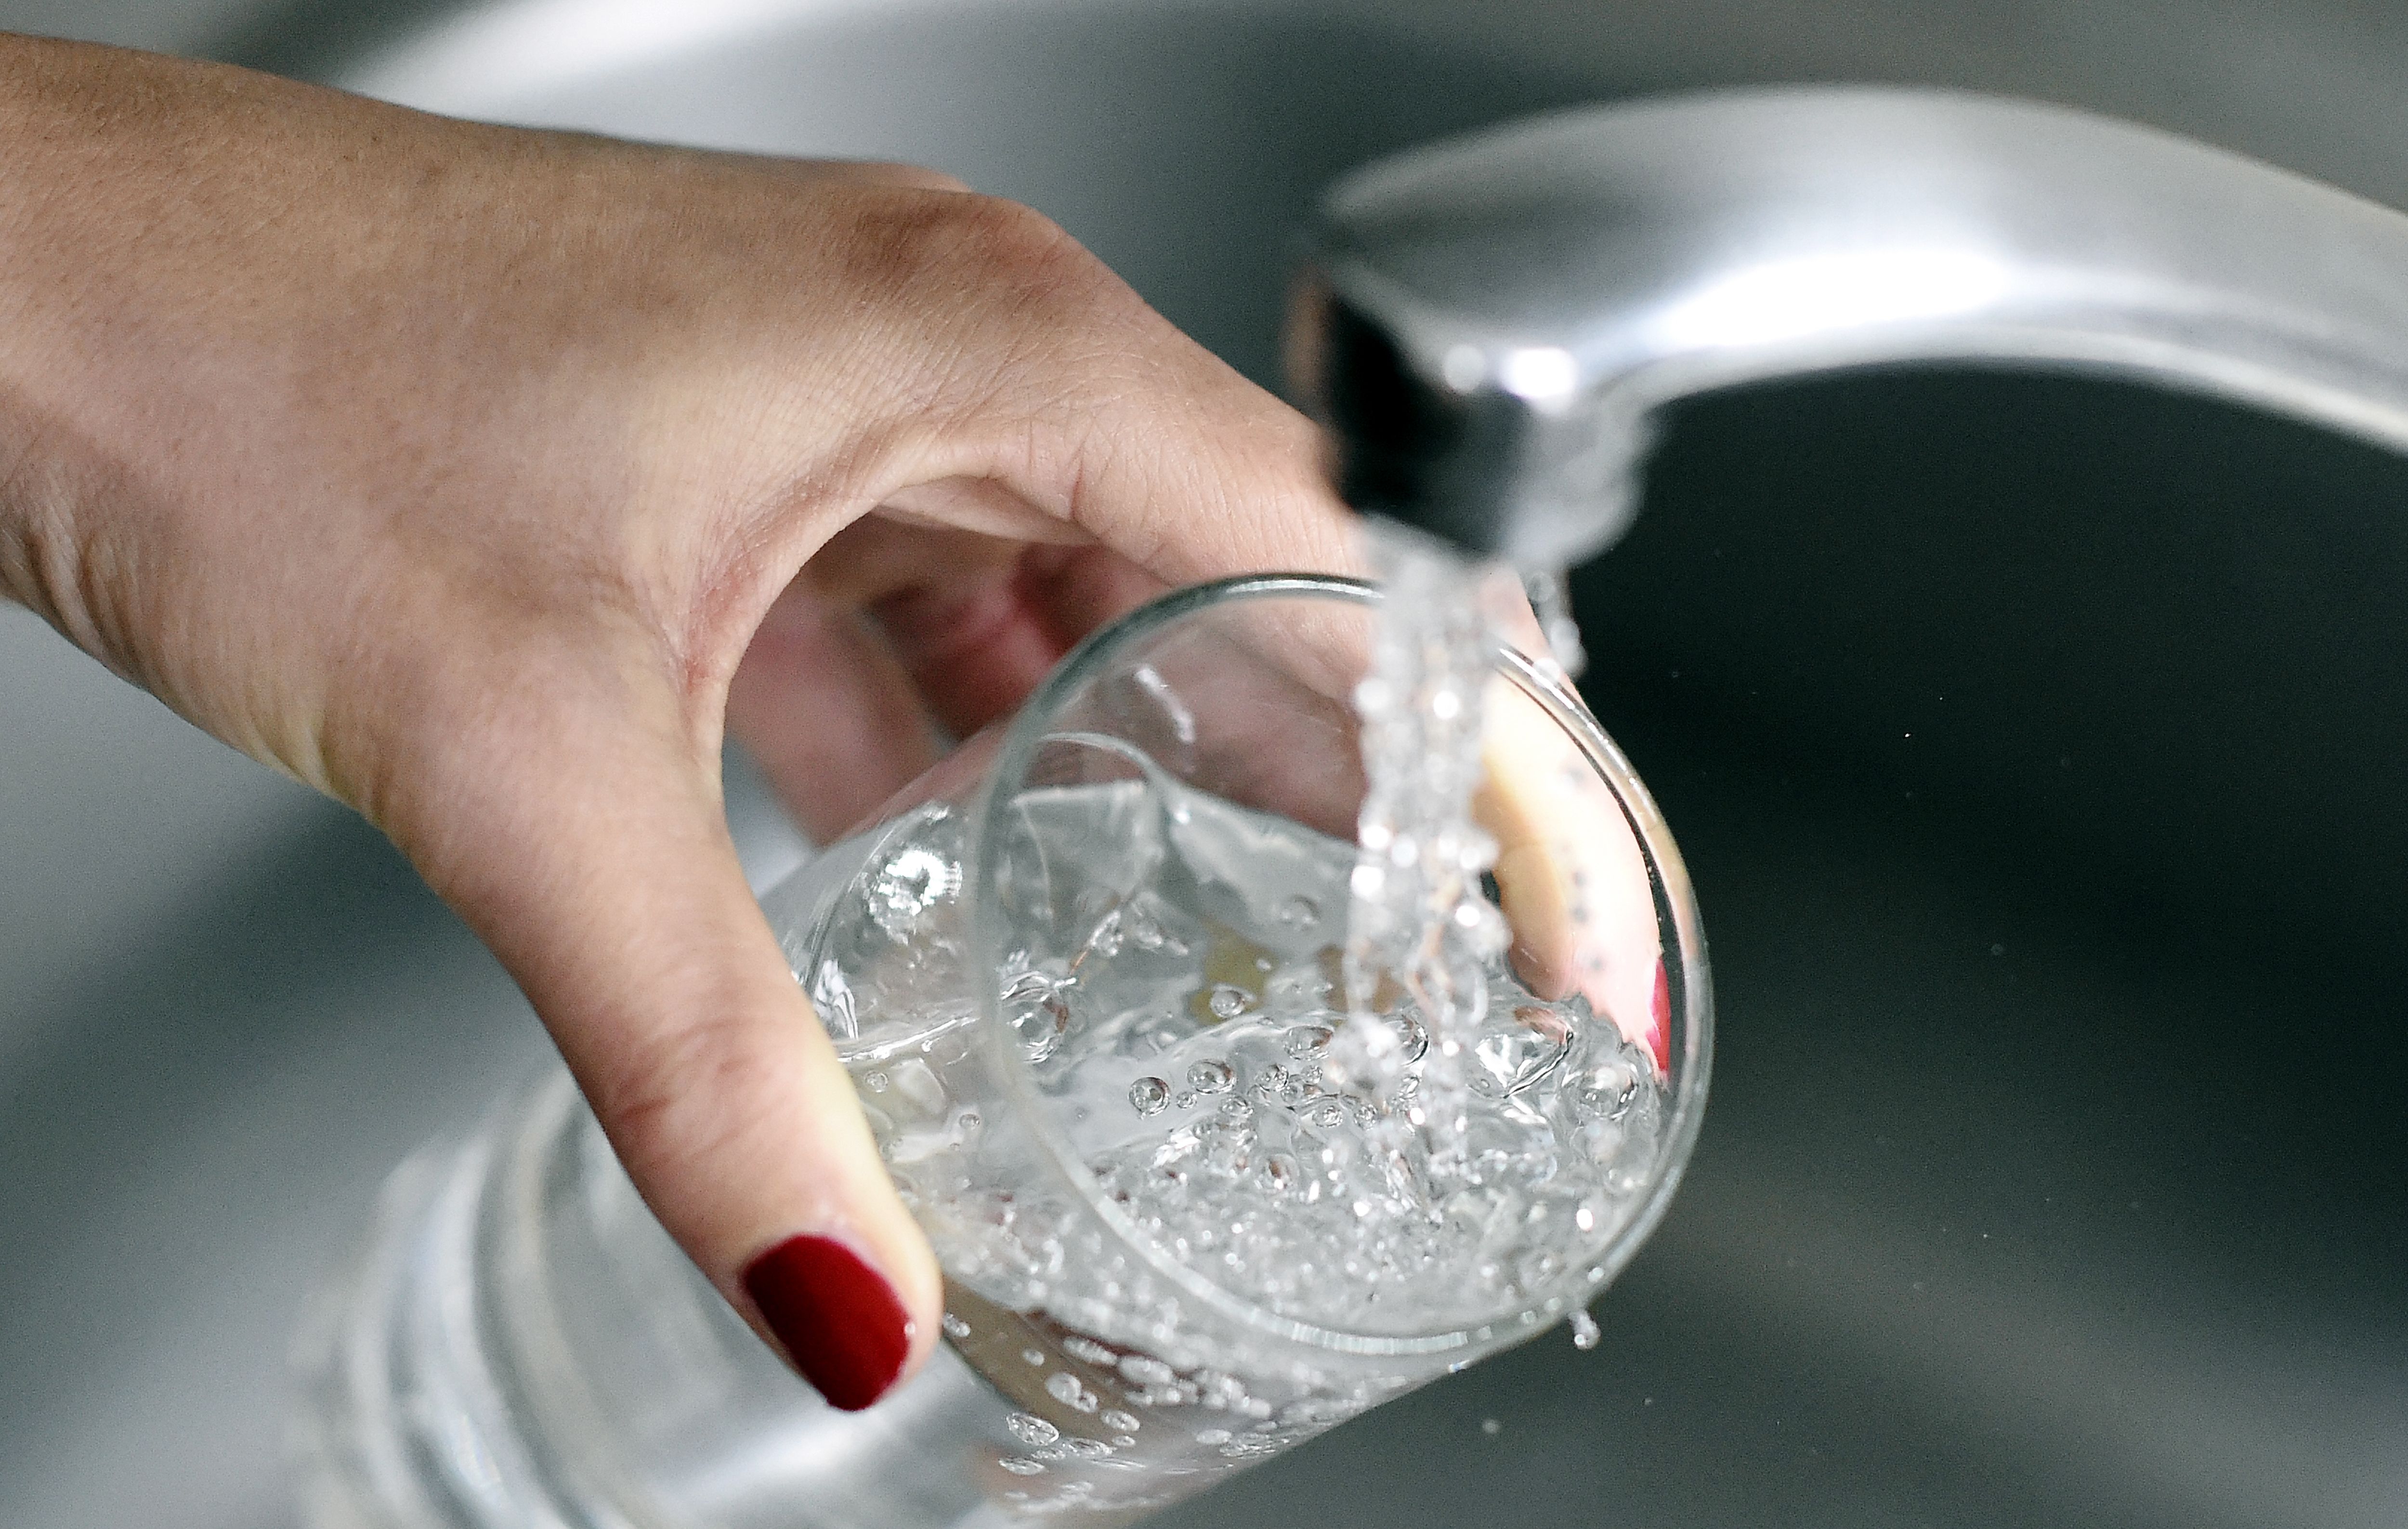 Toxic PFAS 'forever chemicals' found in drinking water across